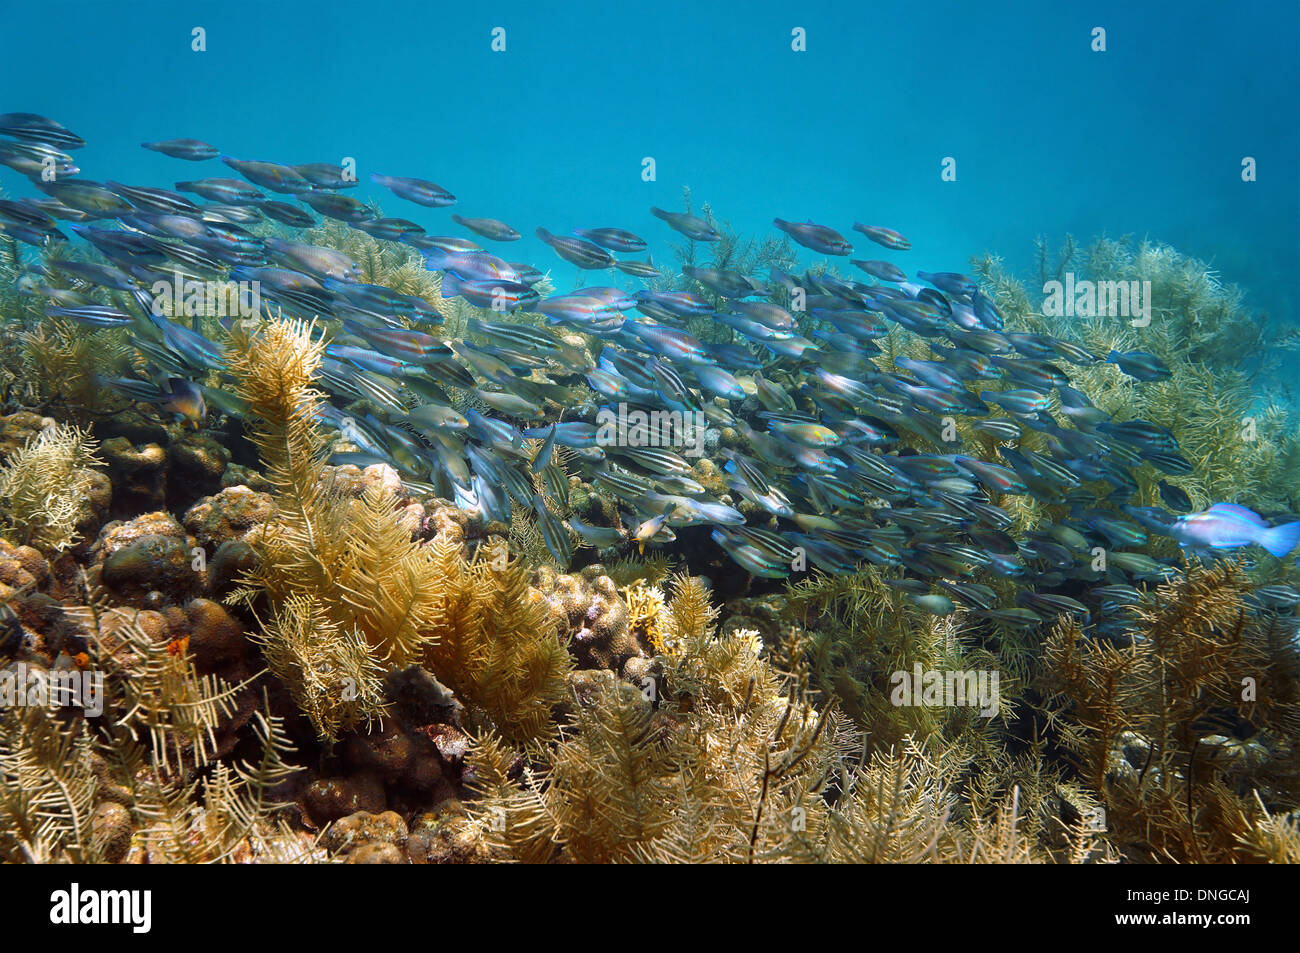 Shoal of striped parrotfish, Scarus iserti, on healthy coral reef, Caribbean sea Stock Photo